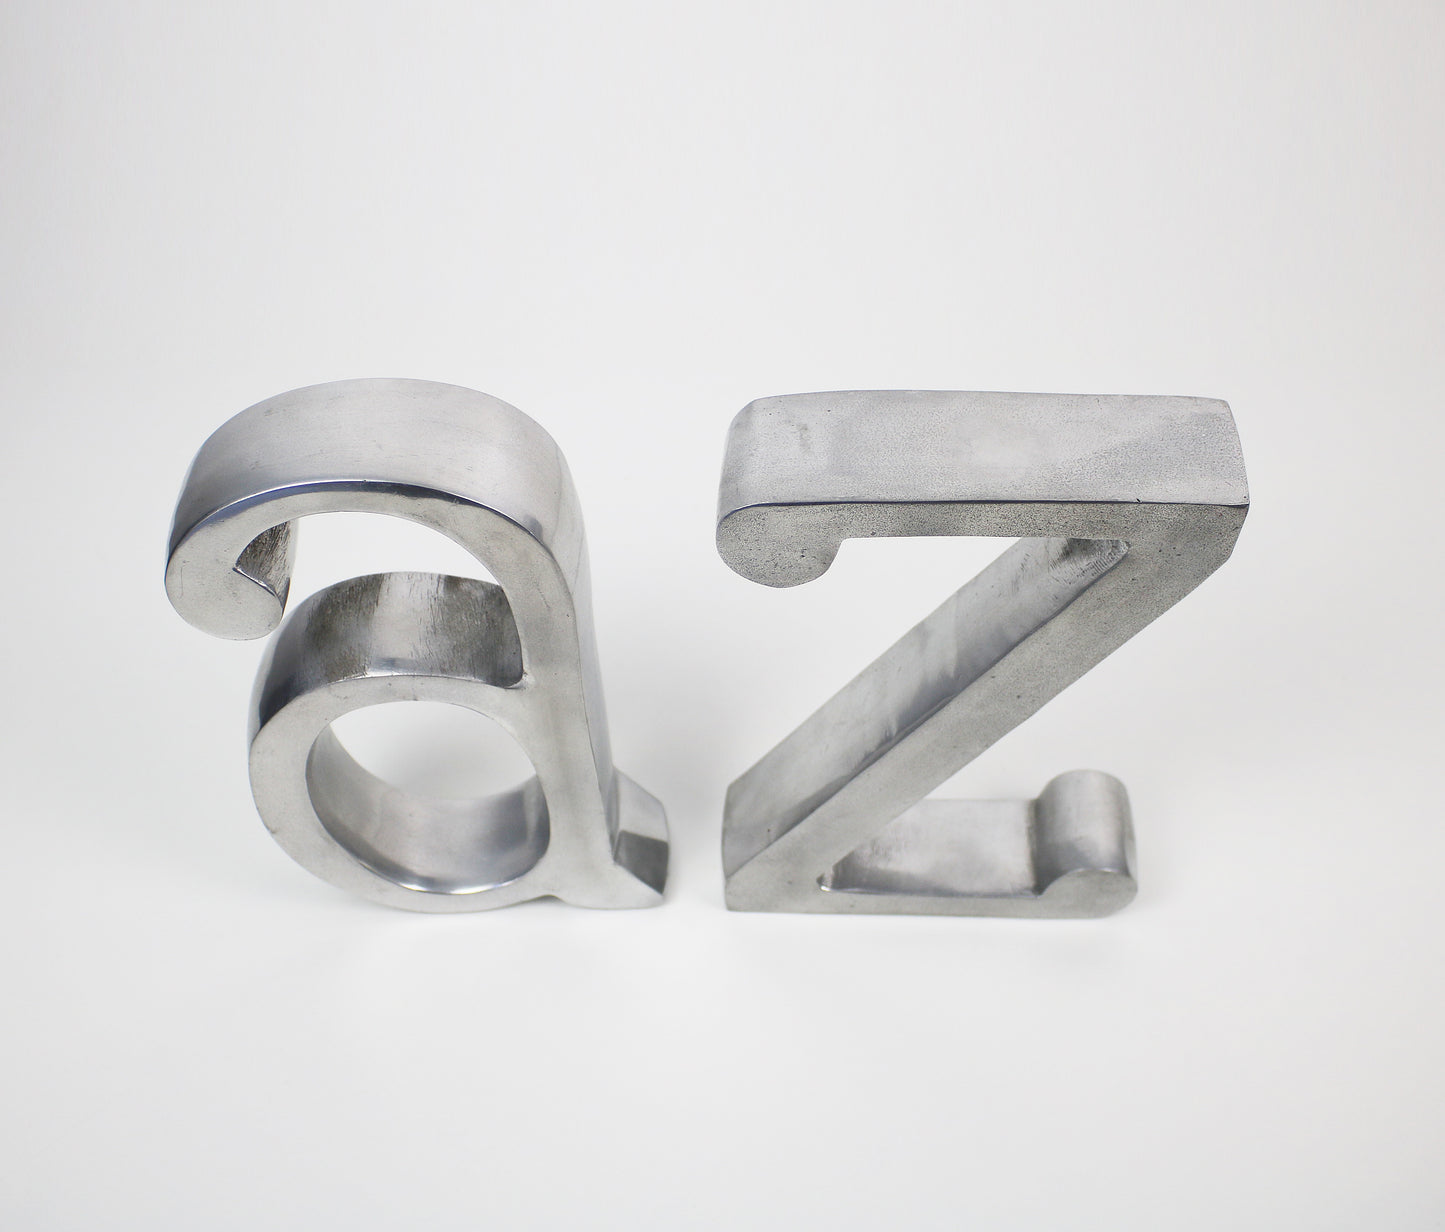 Vintage large A to Z bookends - polished